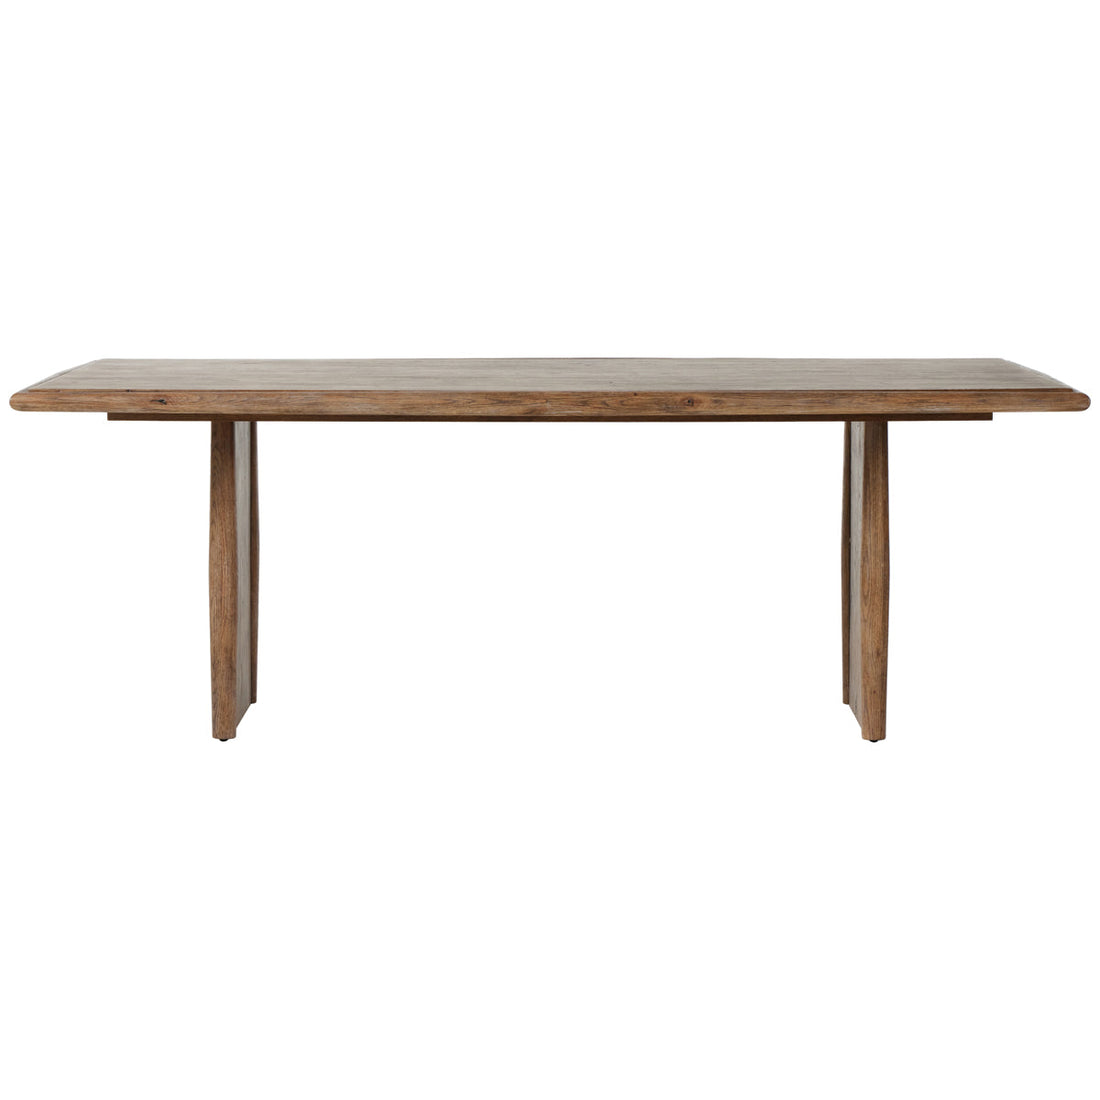 Four Hands Bolton Glenview Dining Table - Weathered Oak